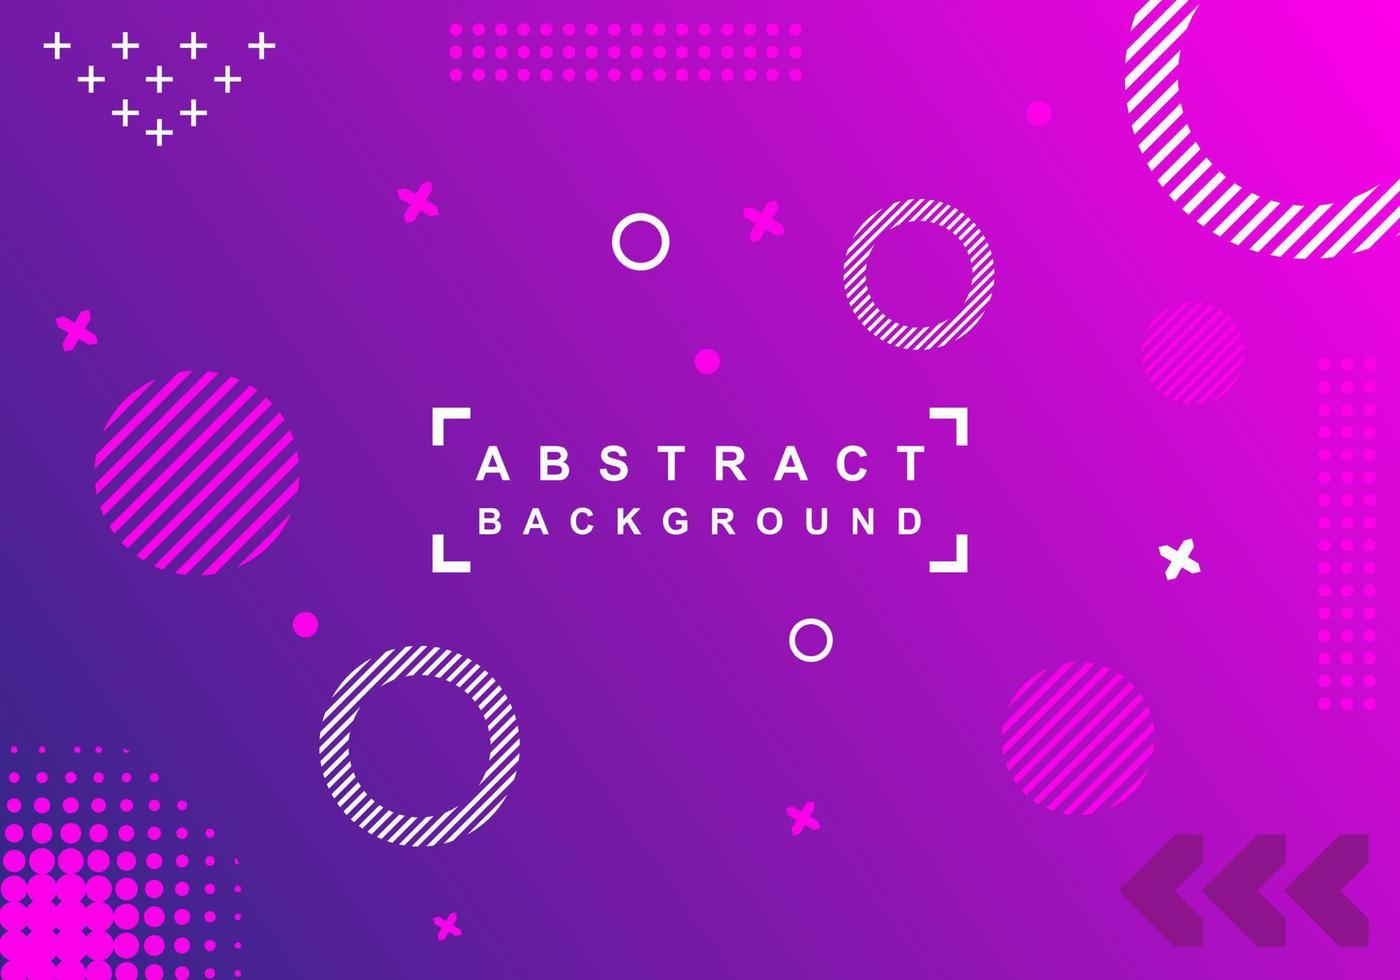 abstract background in bright purple color with design elements.eps vector